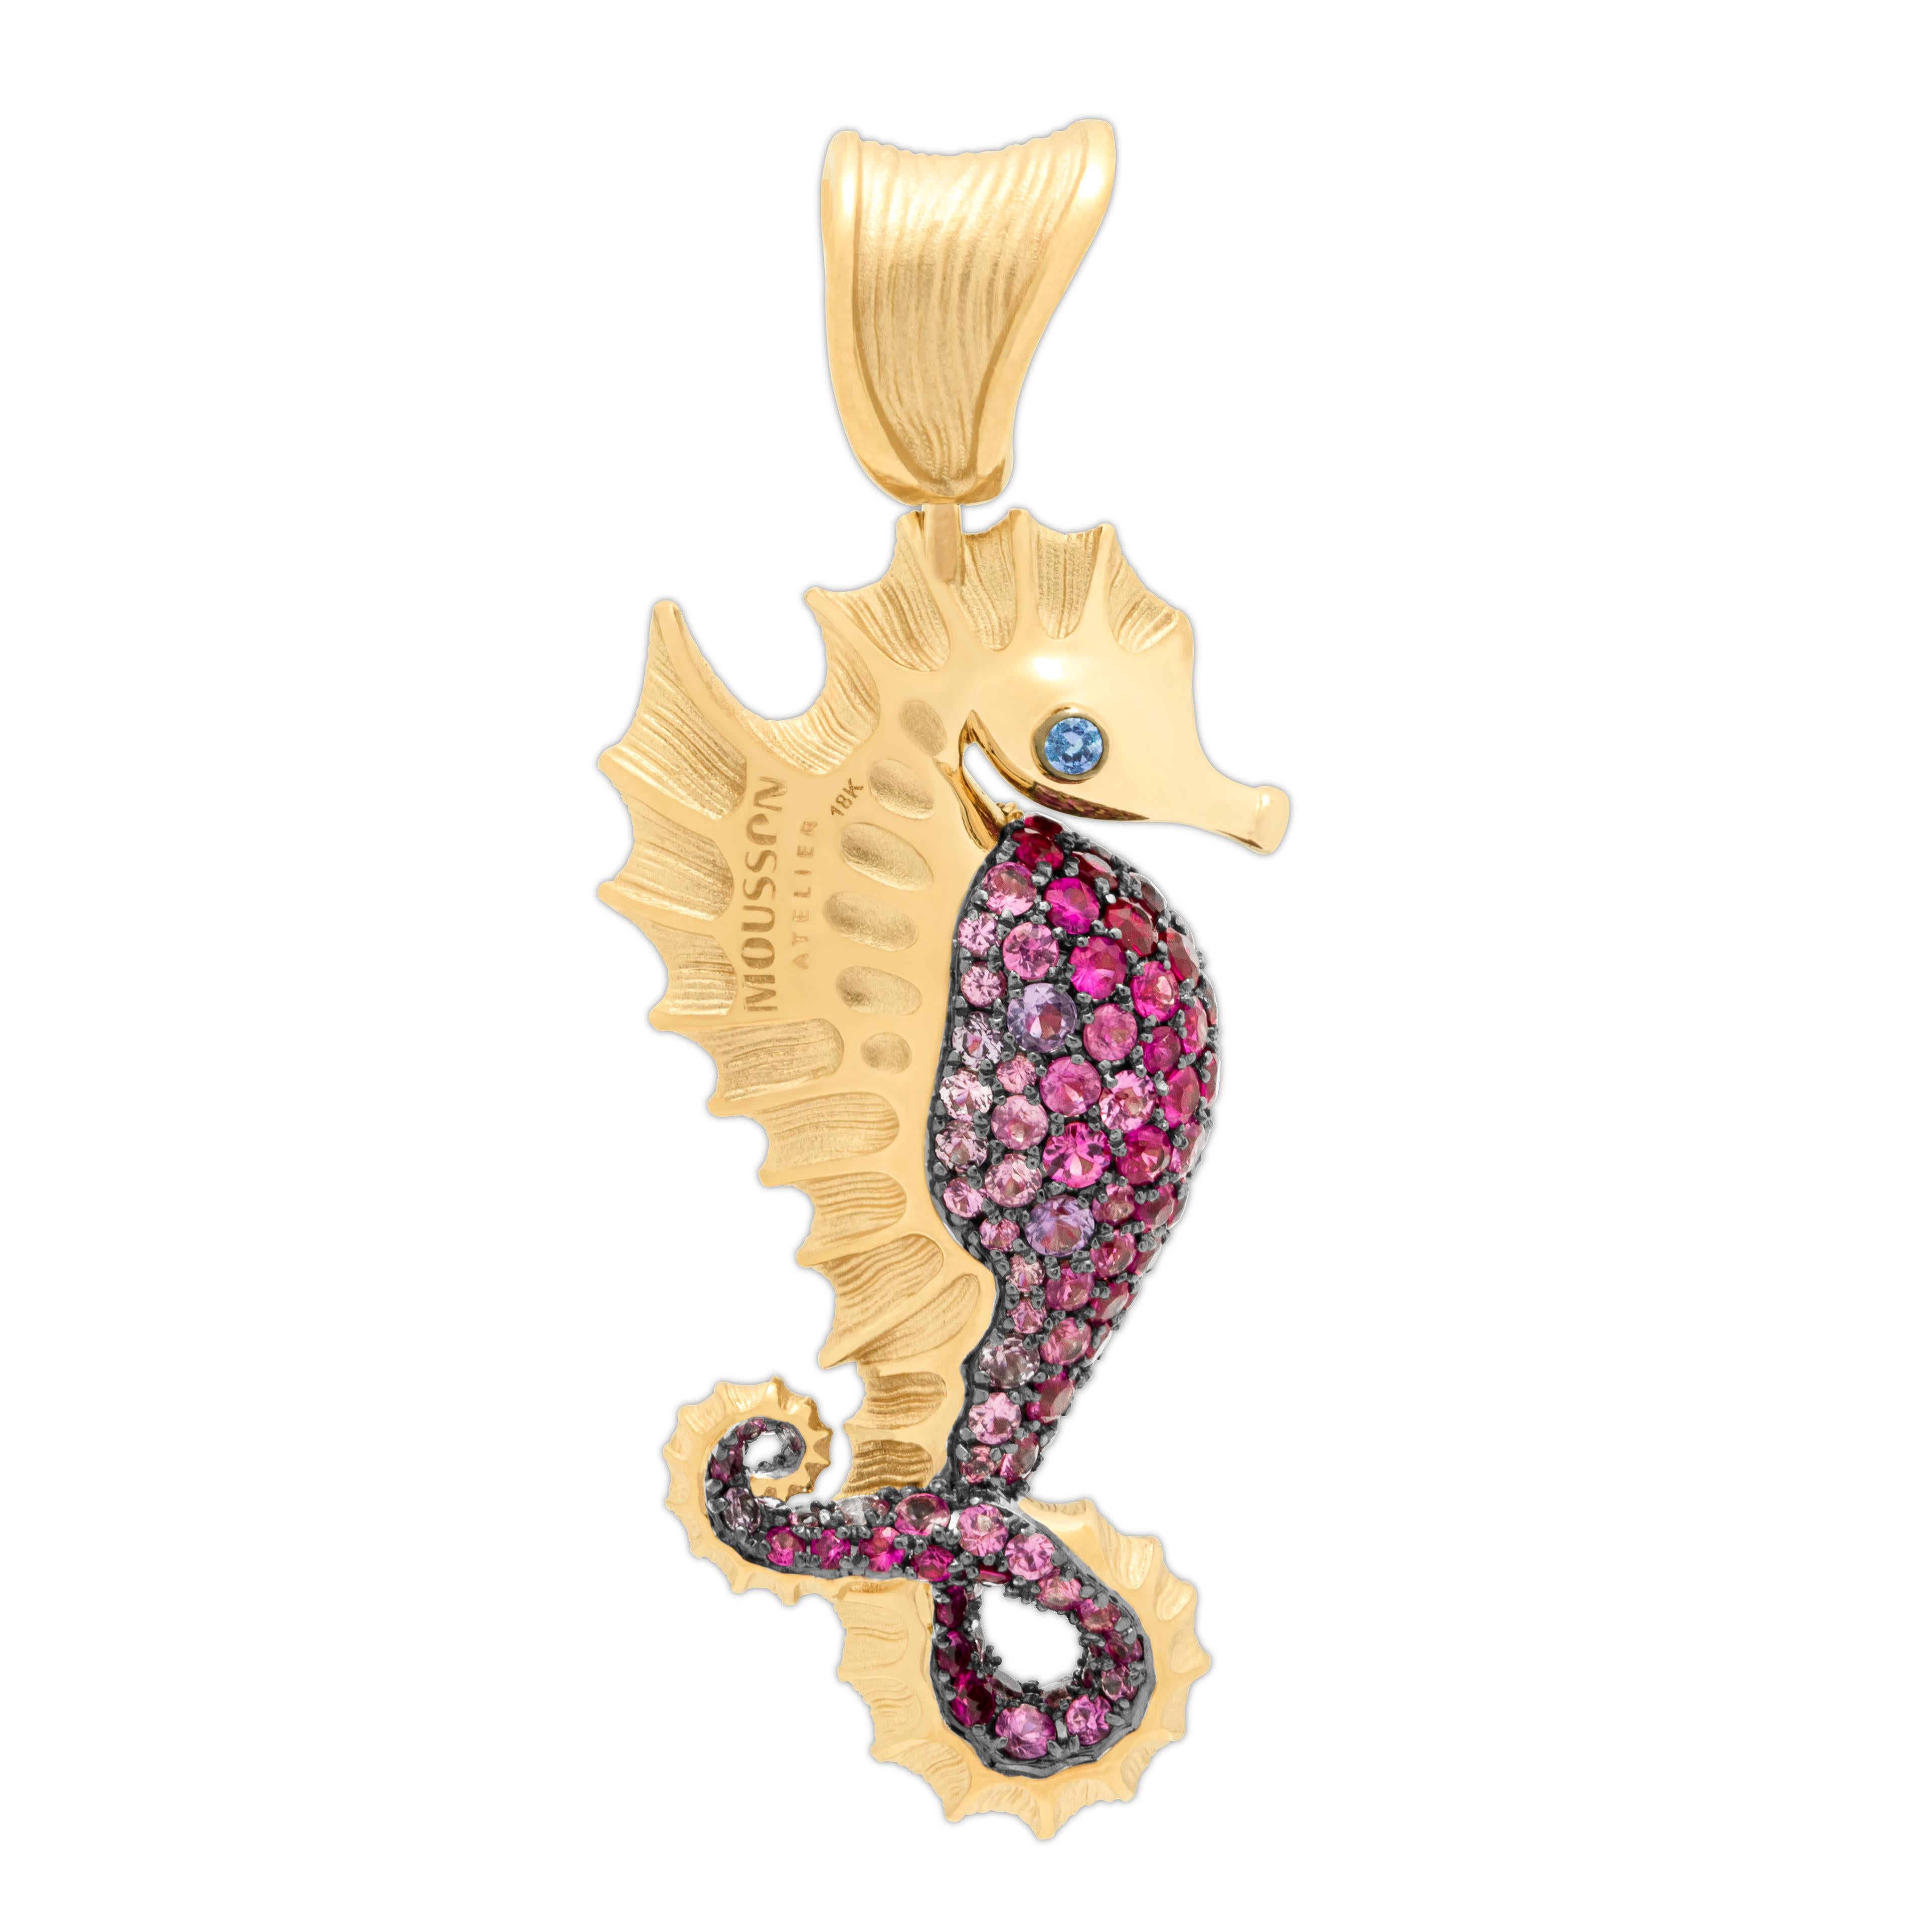 Ruby Pink Blue Sapphires 18 Karat Yellow Black Gold Sea Horse Pendant
Our Eden Collection has a new member - the Seahorse Pendant. Texture of the 18 Karat Yellow Gold closely follows the appearance of the Seahorse with its many spines and skin